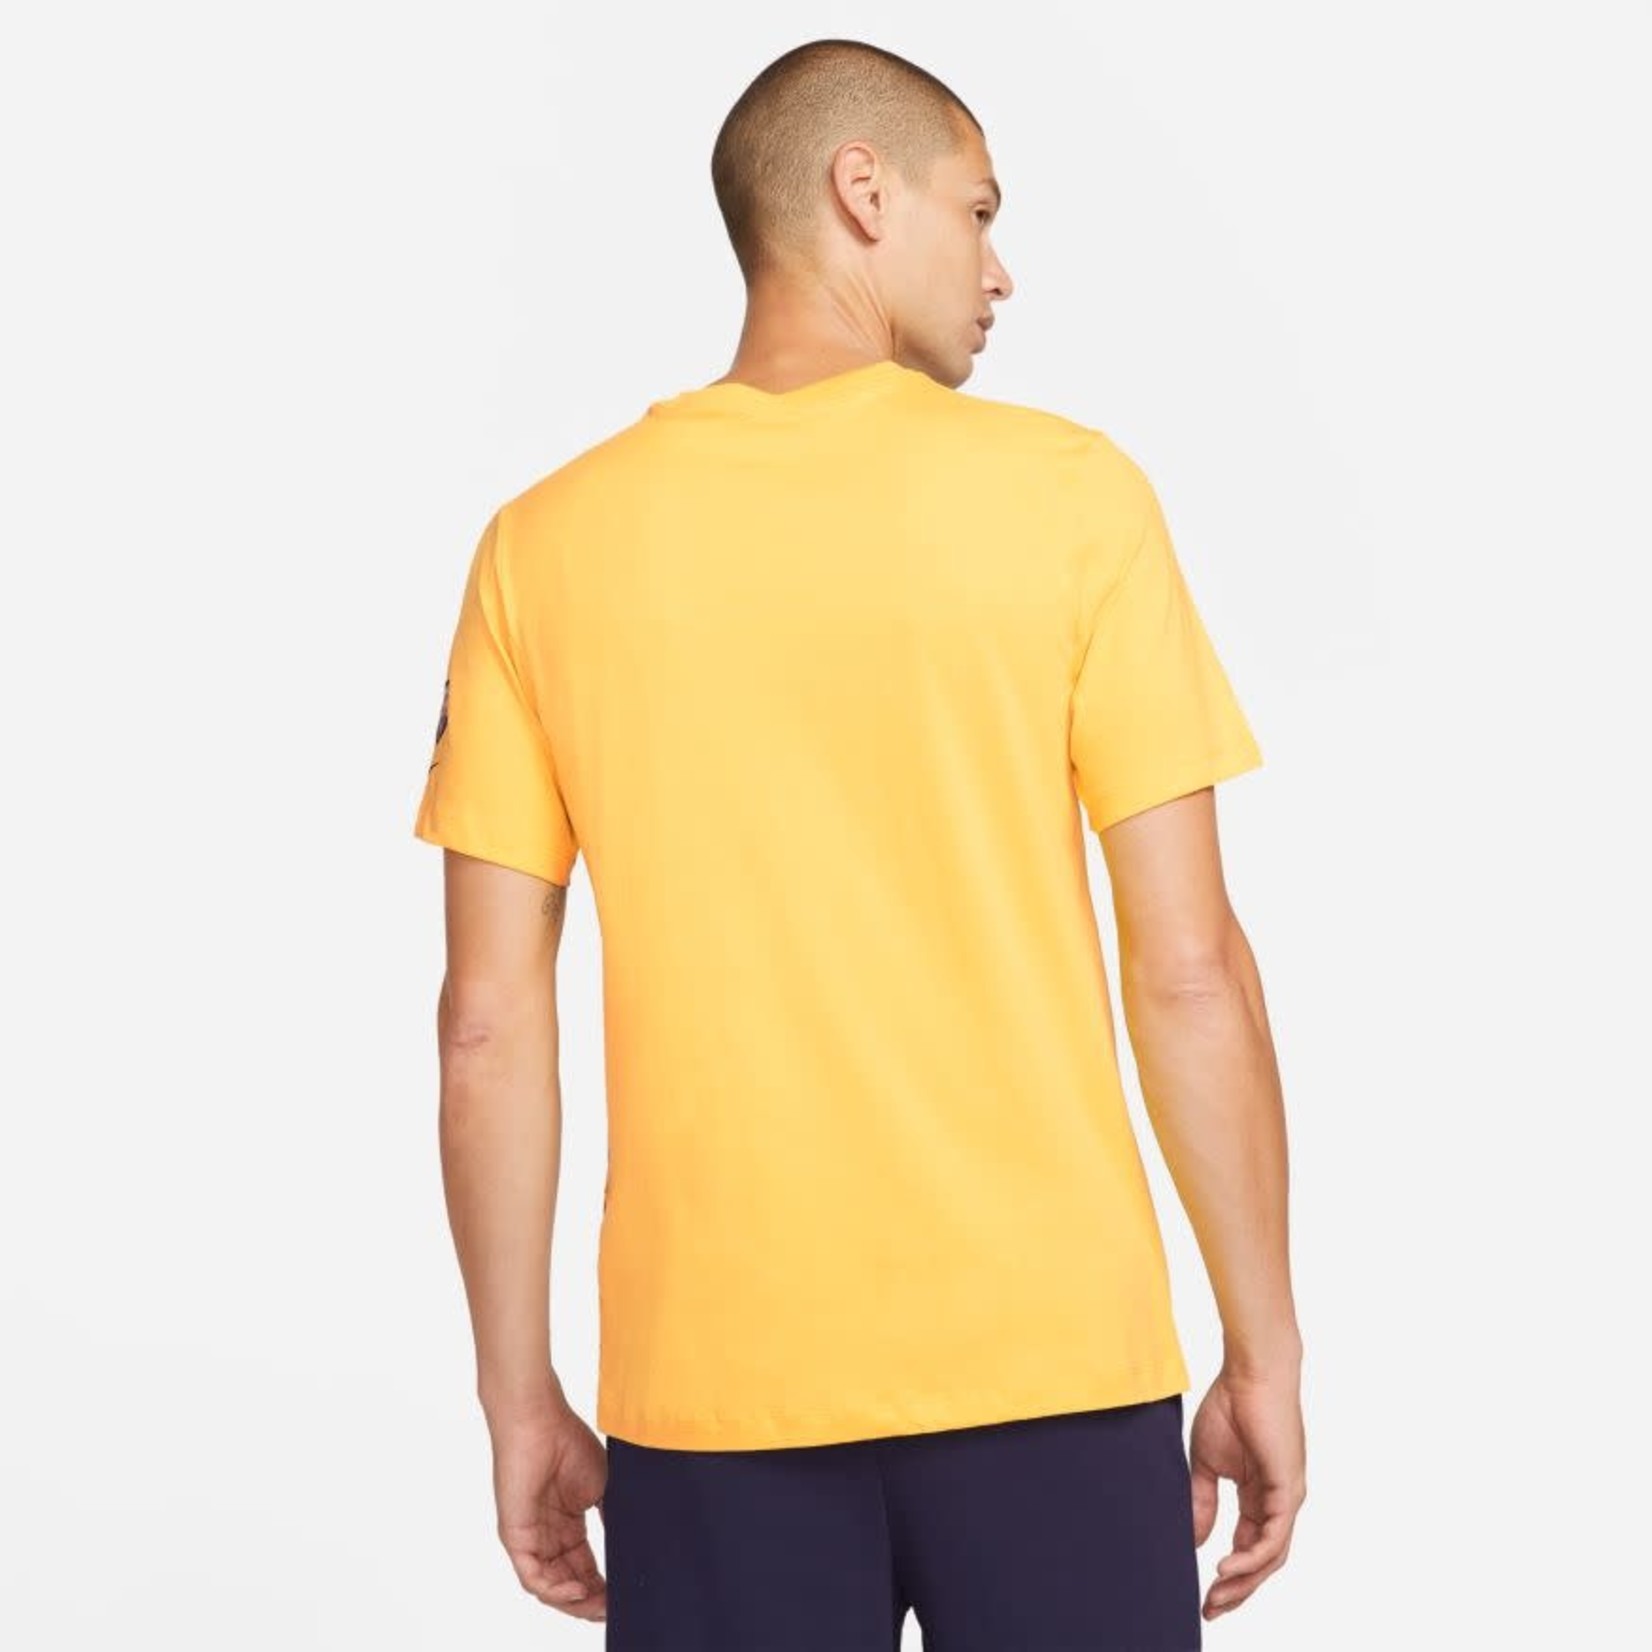 NIKE FC BARCELONA 21/22 VOICE TEE (YELLOW/RED/BLUE)